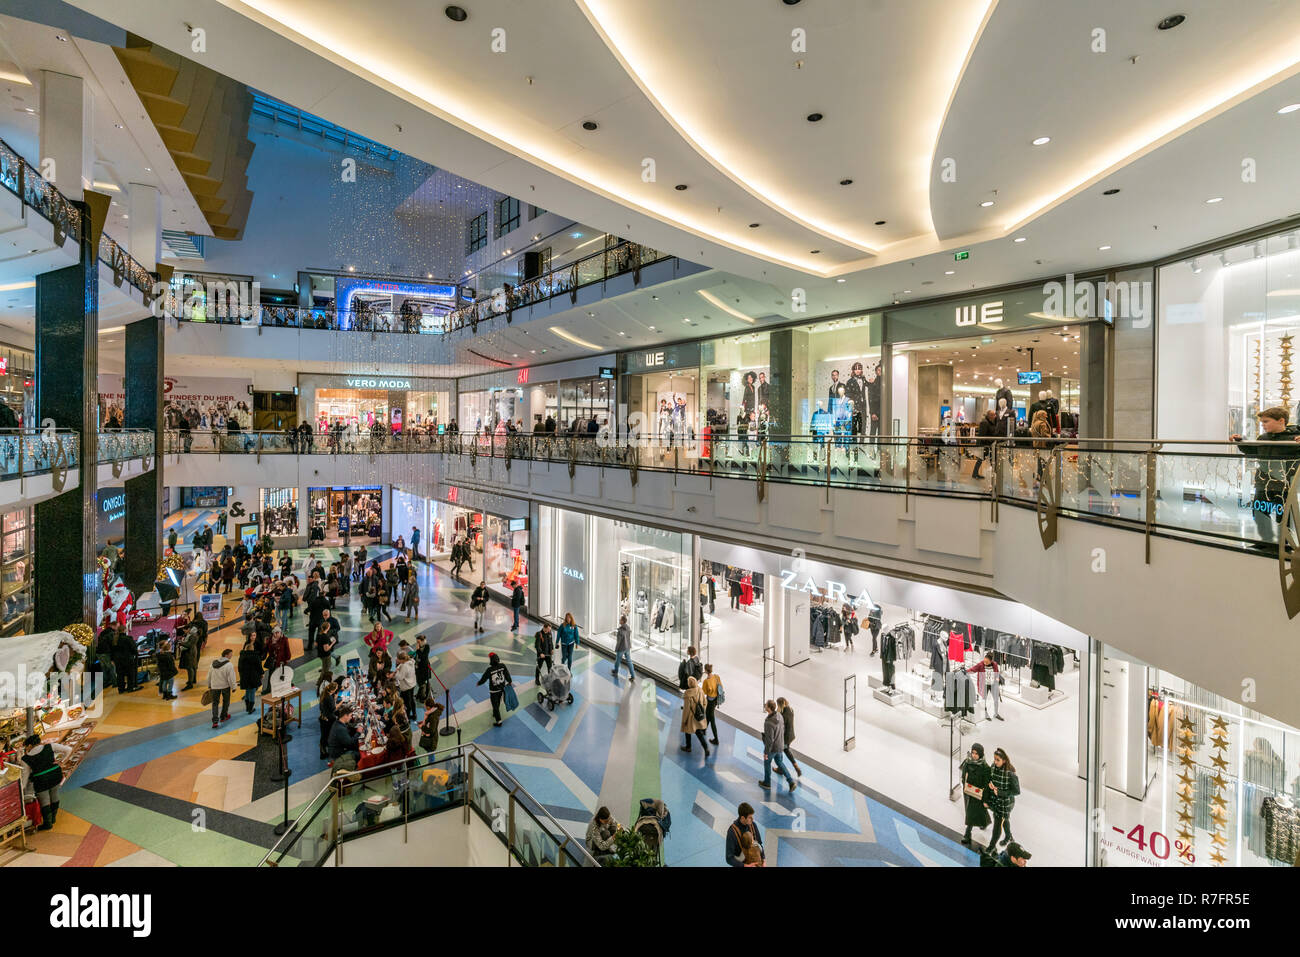 Alexa Shopping Center High Resolution Stock Photography and Images - Alamy